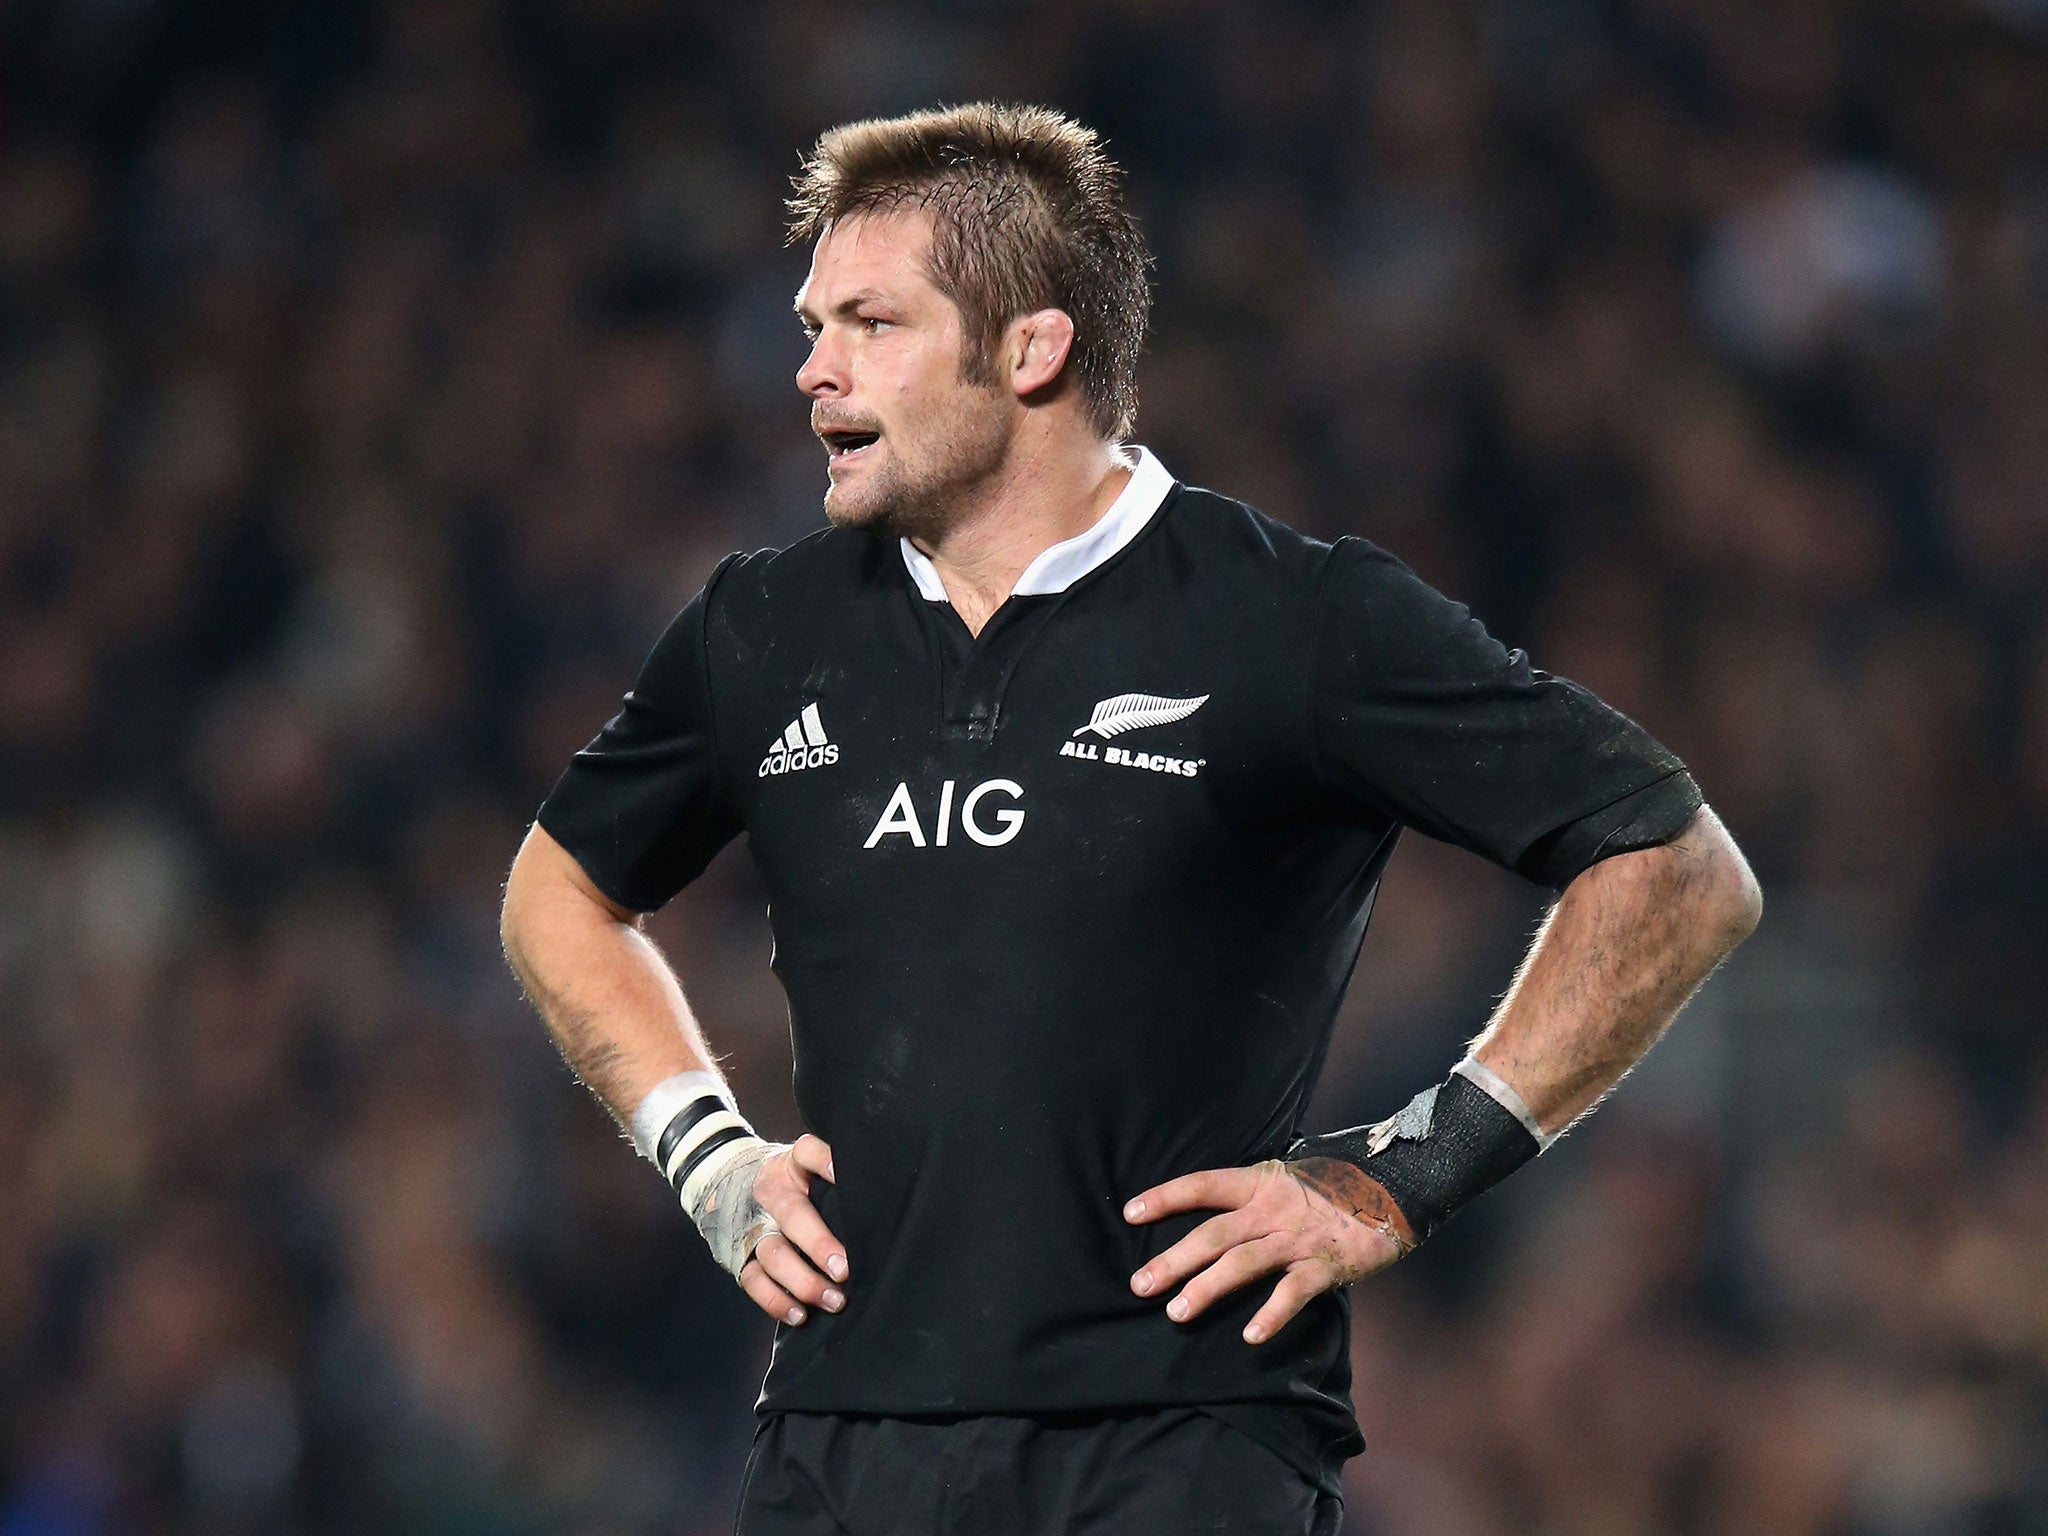 Richie McCaw takes a breather during the first Test between New Zealand and England